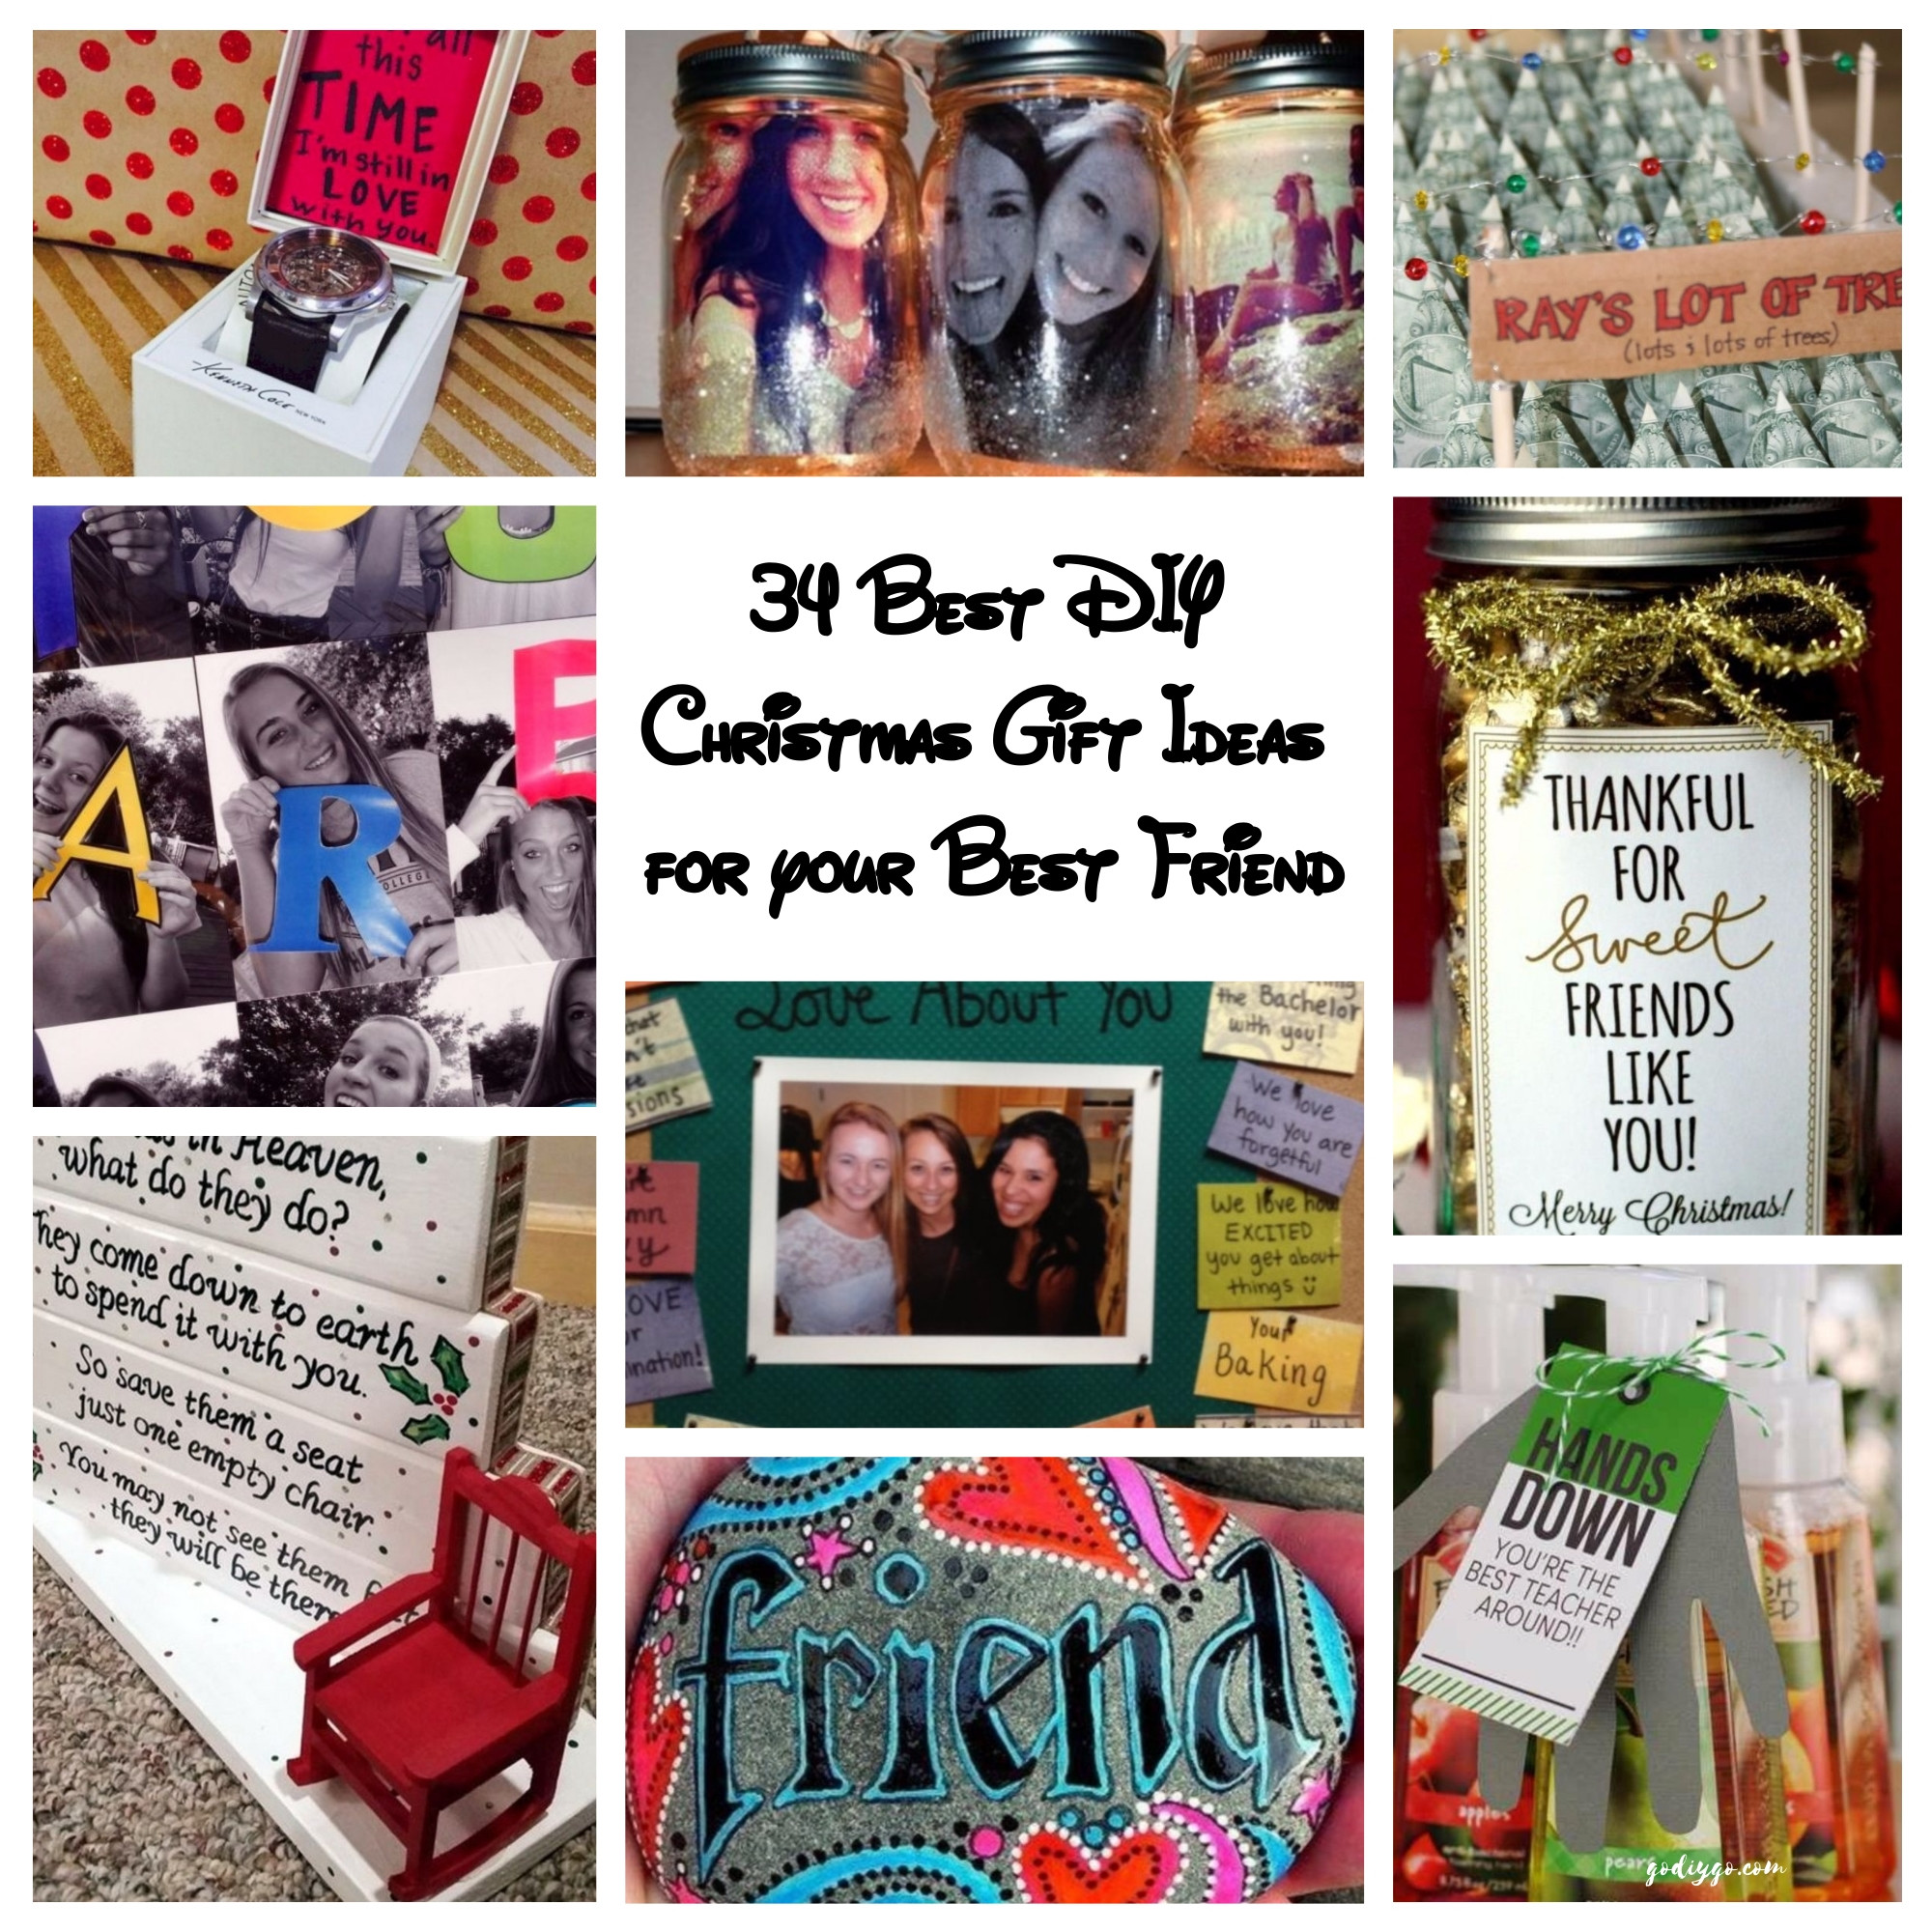 Best ideas about Christmas Gift Ideas For Your Best Friend
. Save or Pin 34 Best DIY Christmas Gift Ideas for your Best Friend Now.